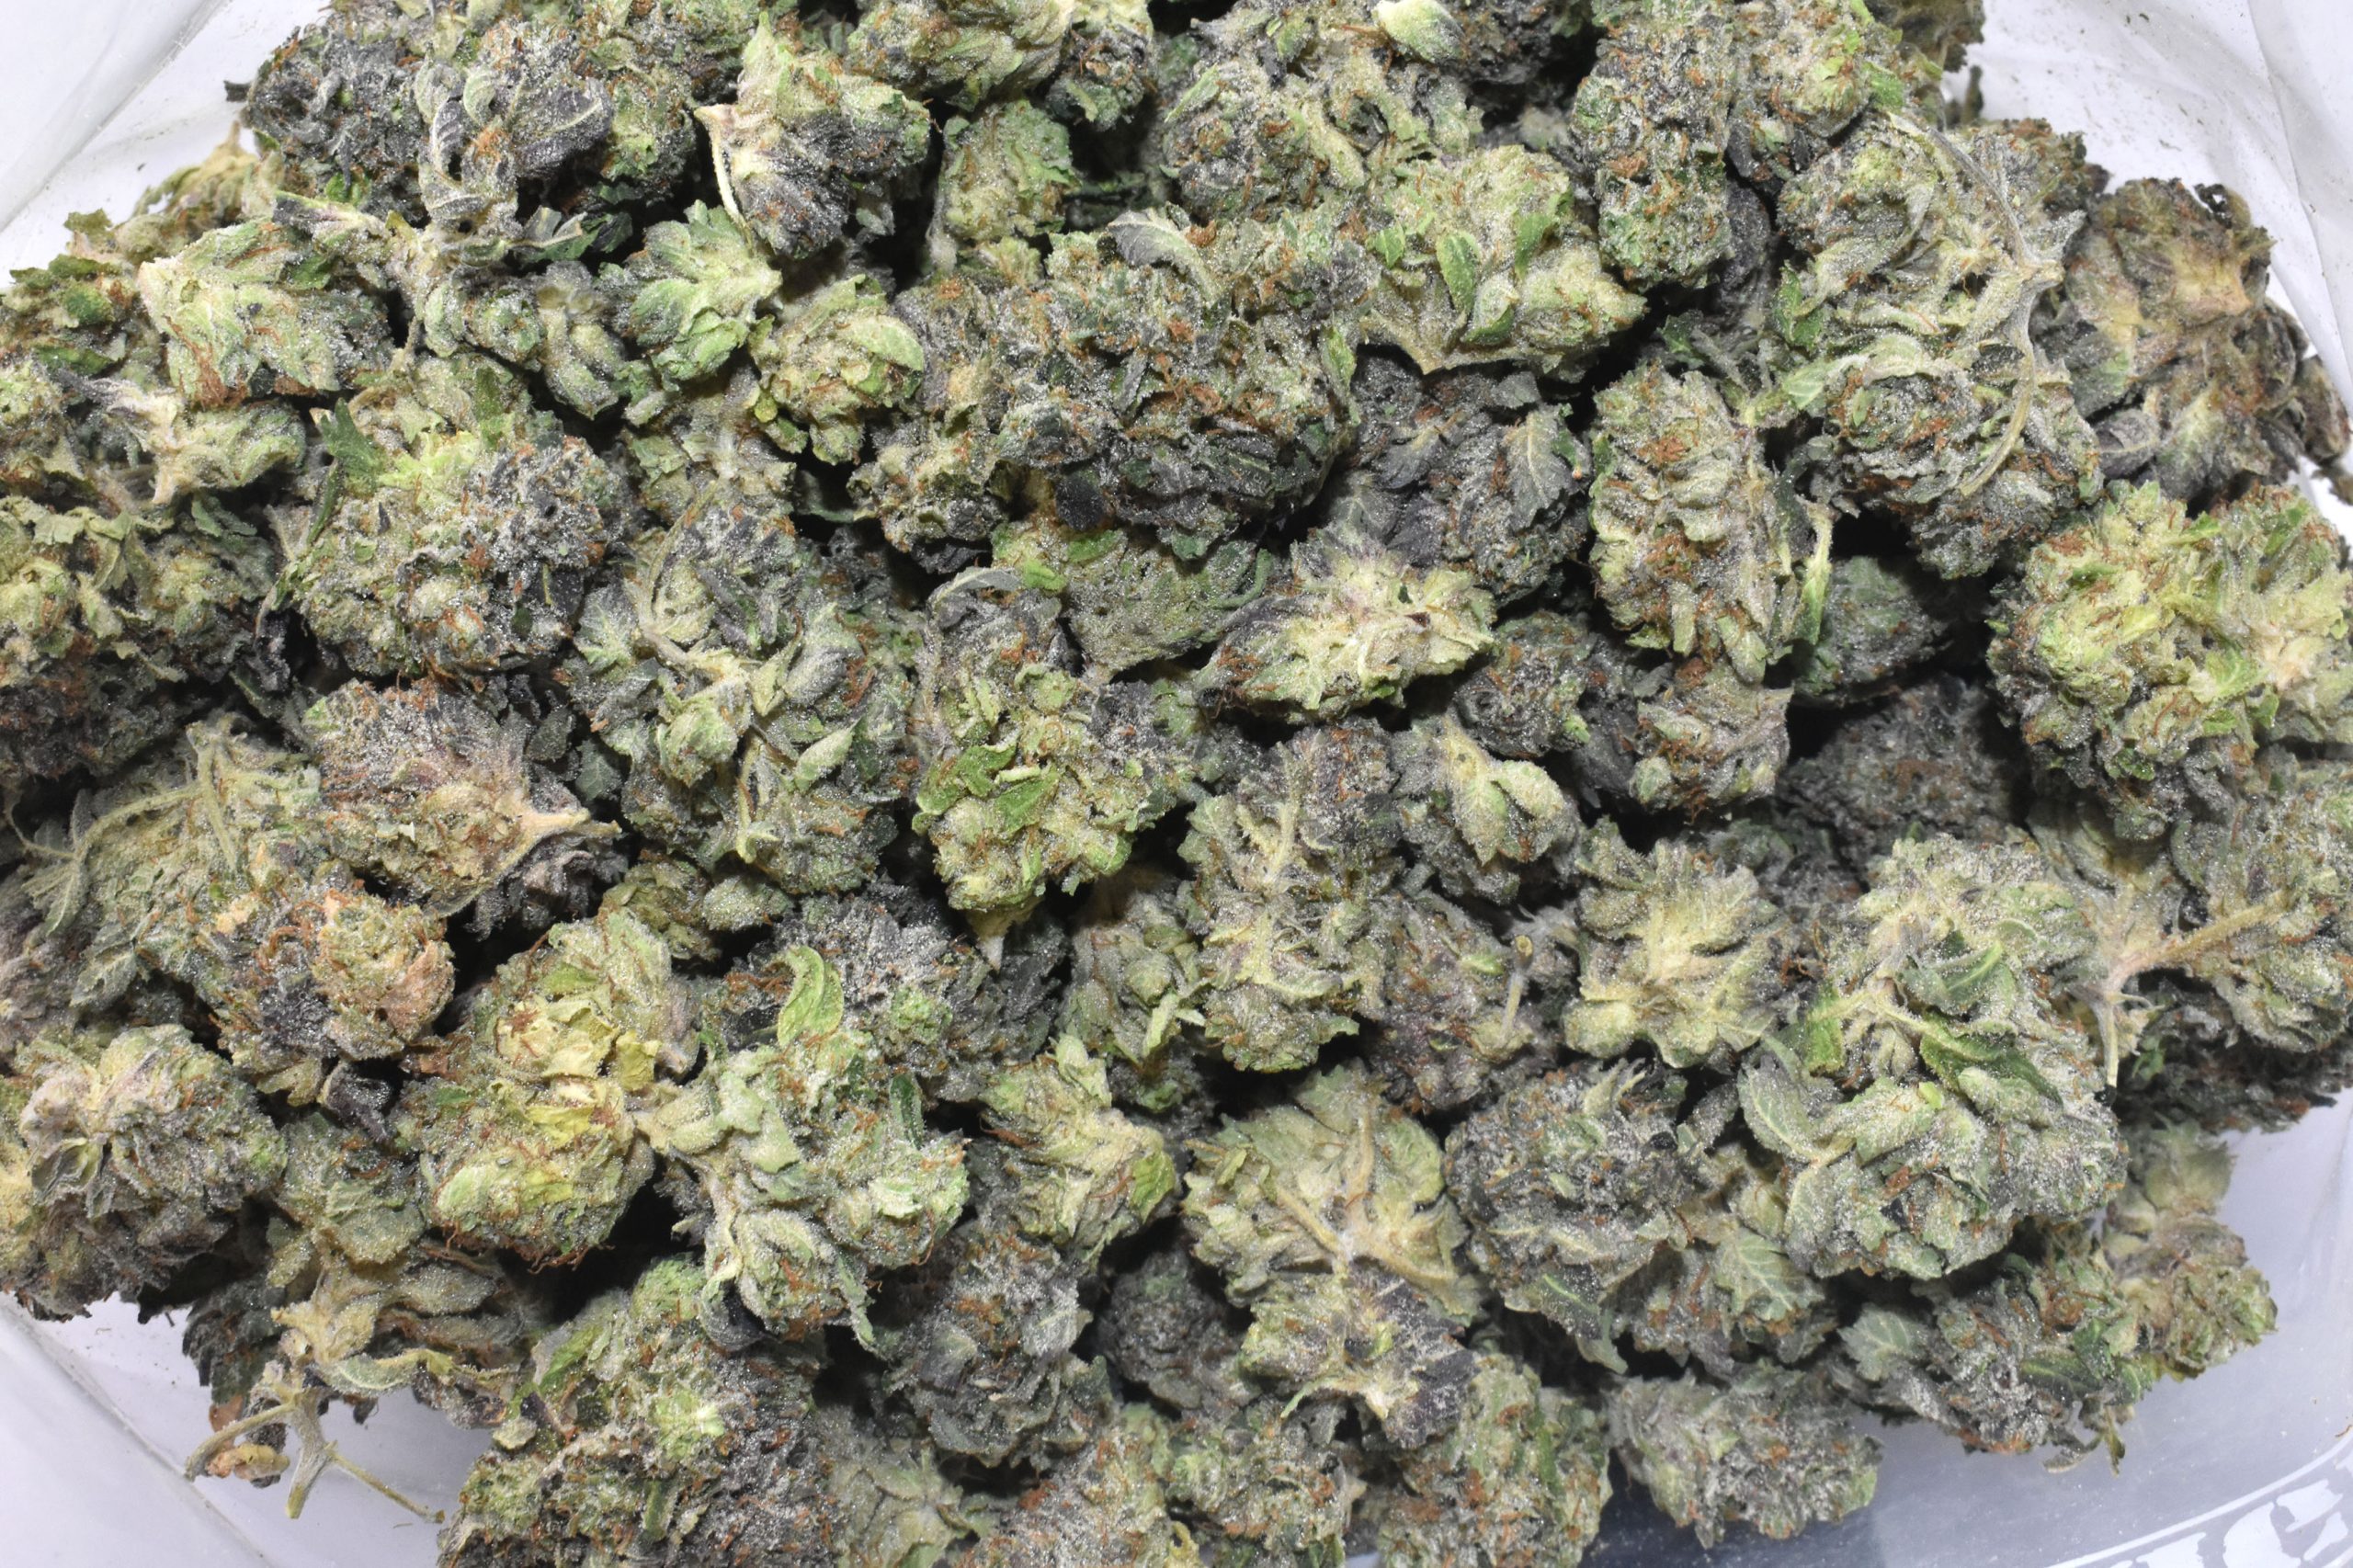 Buy-pink-rozay-at-chronicfarms.cc-online-weed-dispensary